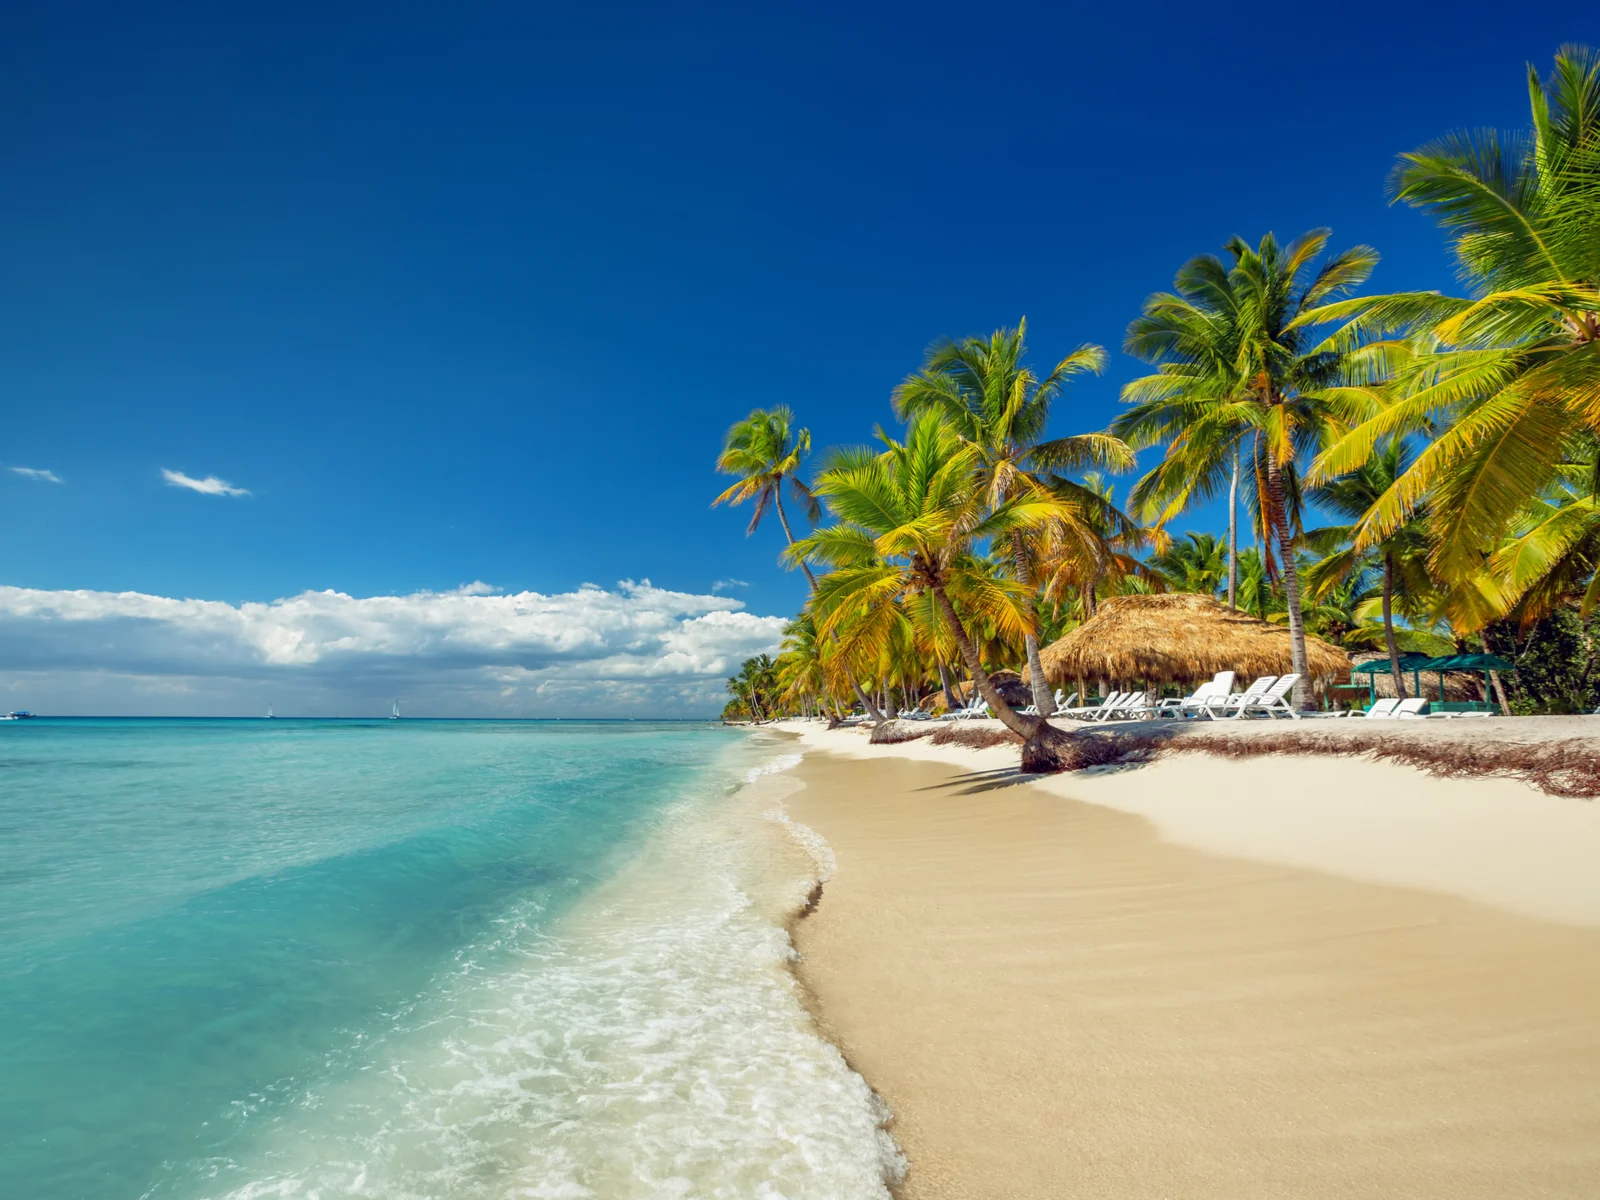 White sand beach with teal water during the best time to visit Punta Cana